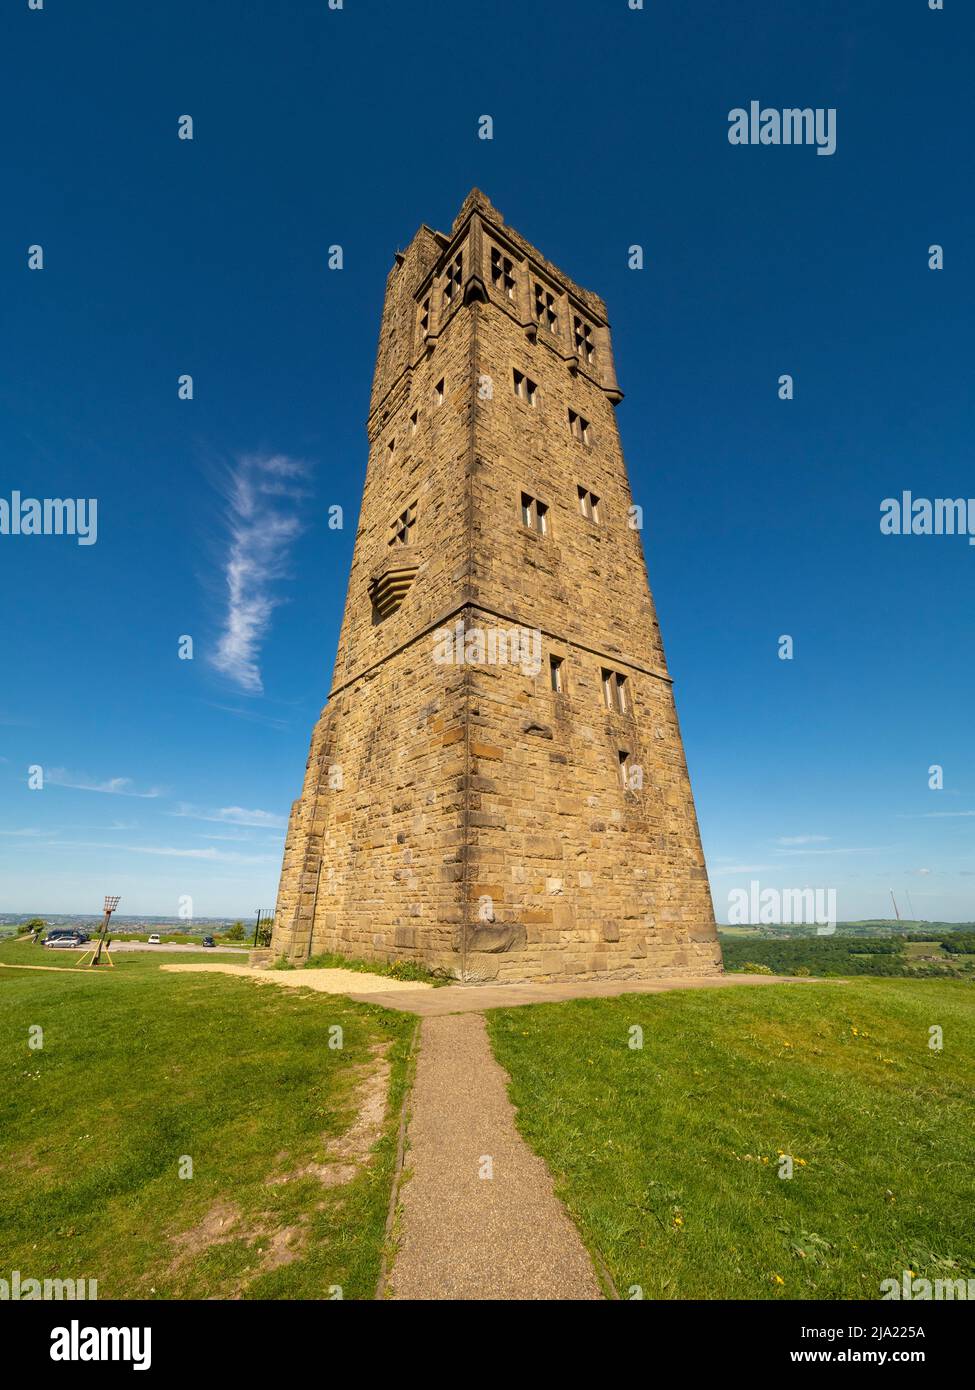 Pfad in Richtung Victoria Tower, Castle Hill. Huddersfield. West Yorkshire. Stockfoto